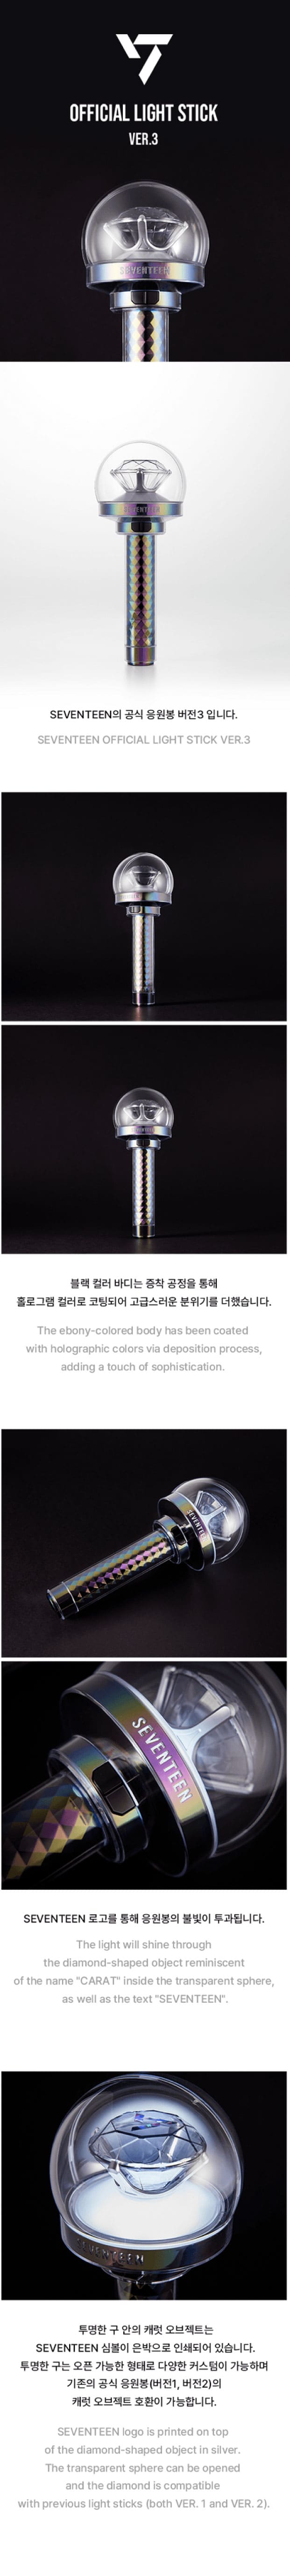 Seventeen - Official Light Stick Ver. 3 – Maycore Collection Ltd.